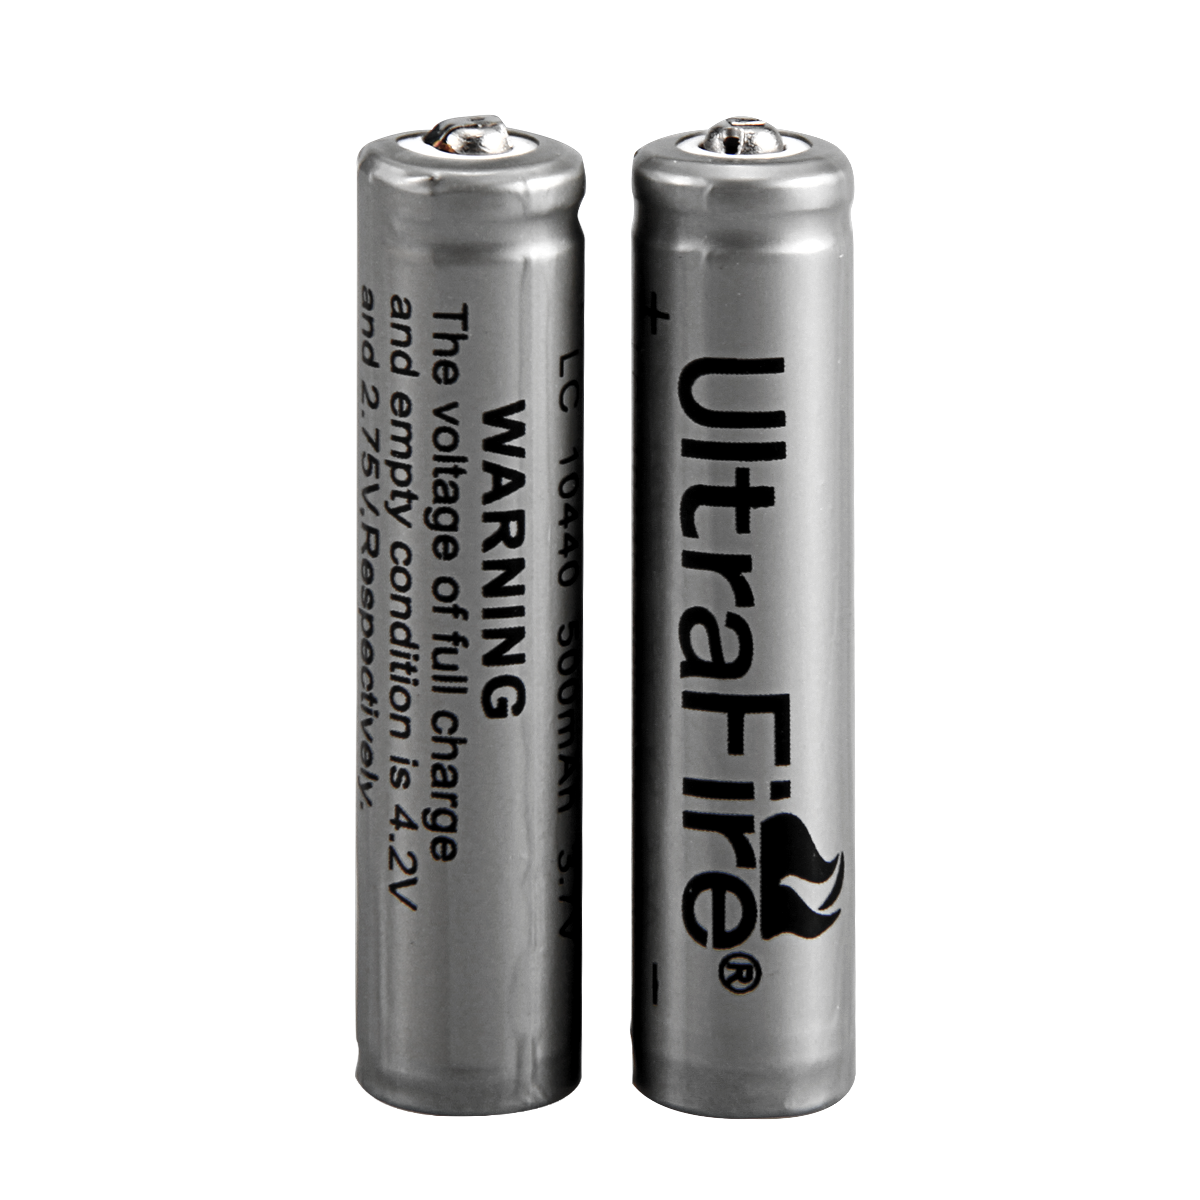 UltraFire 500mAh 3.7V 10440 Rechargeable Lithium Battery With Protecti